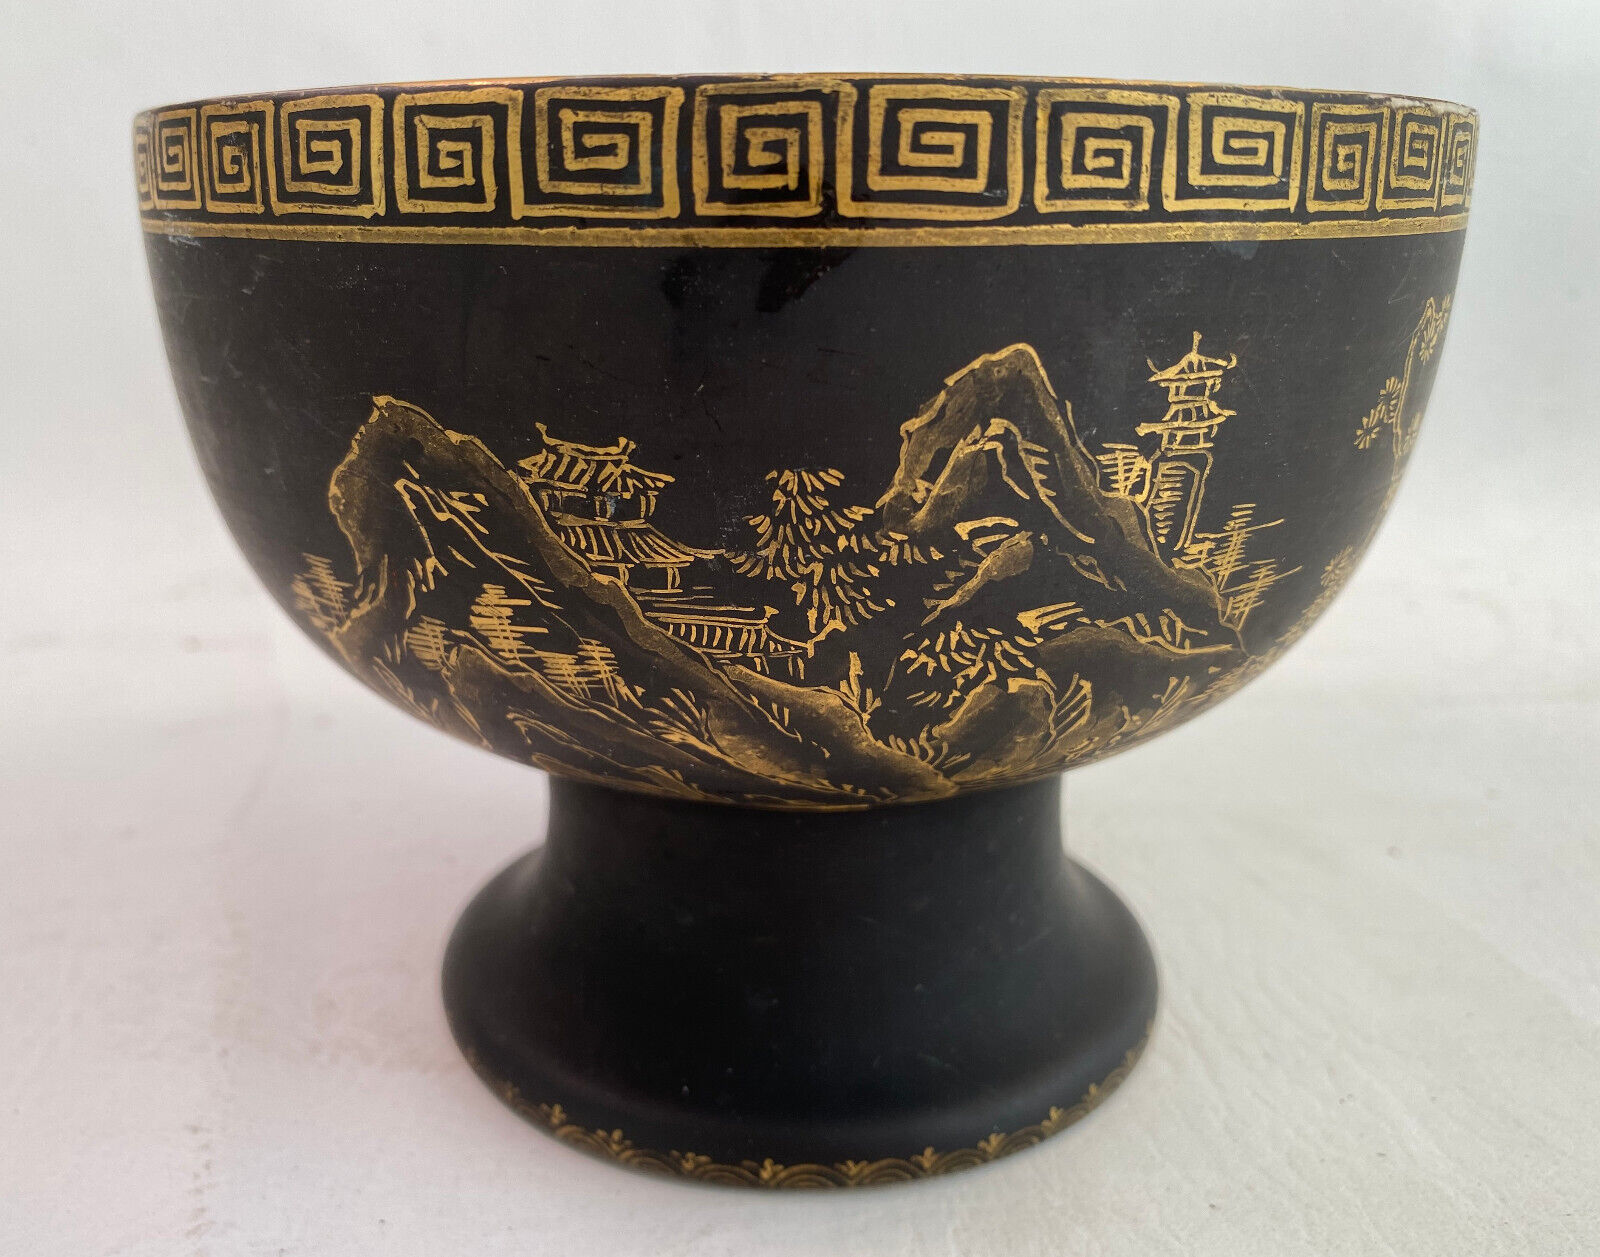 Japanese Satsuma Dish in Matte Black and Gold Designs - Signed - Ca 1900-1920